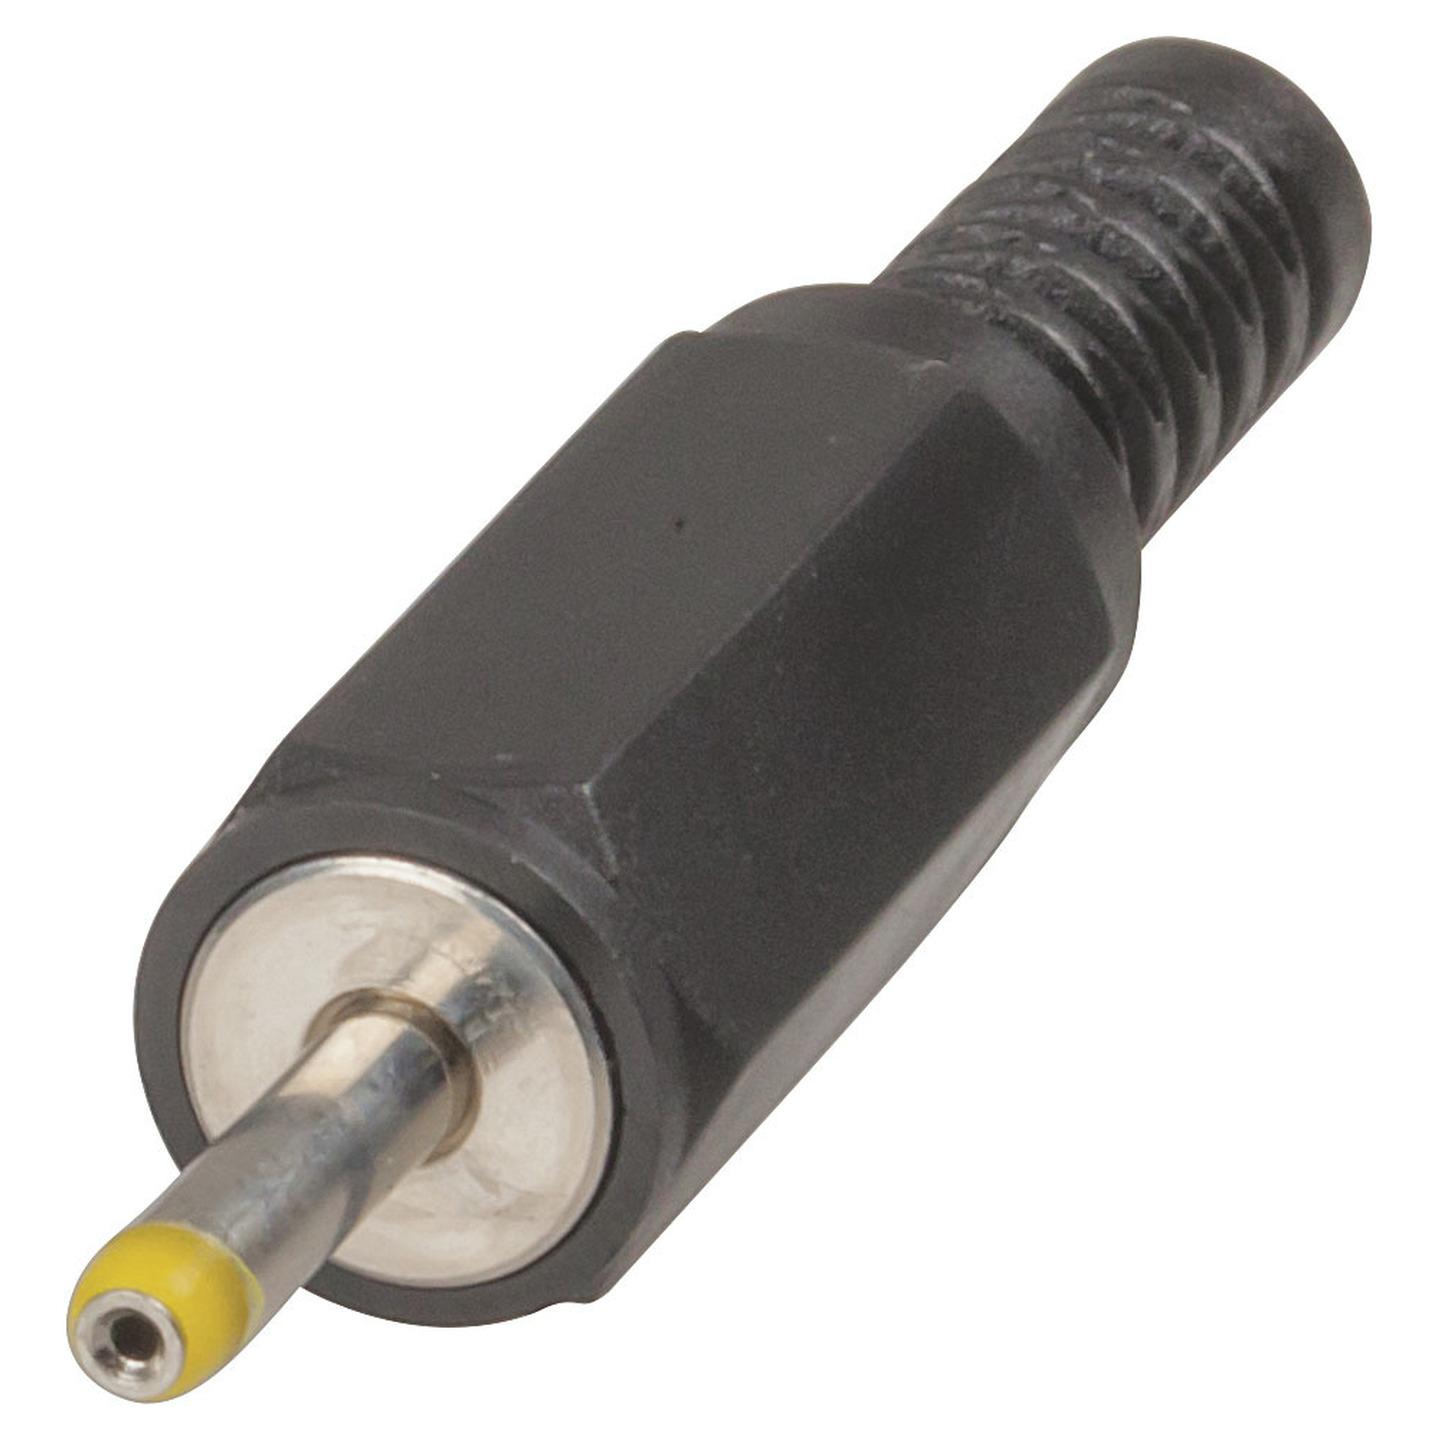 0.7mm DC Power Line Connector